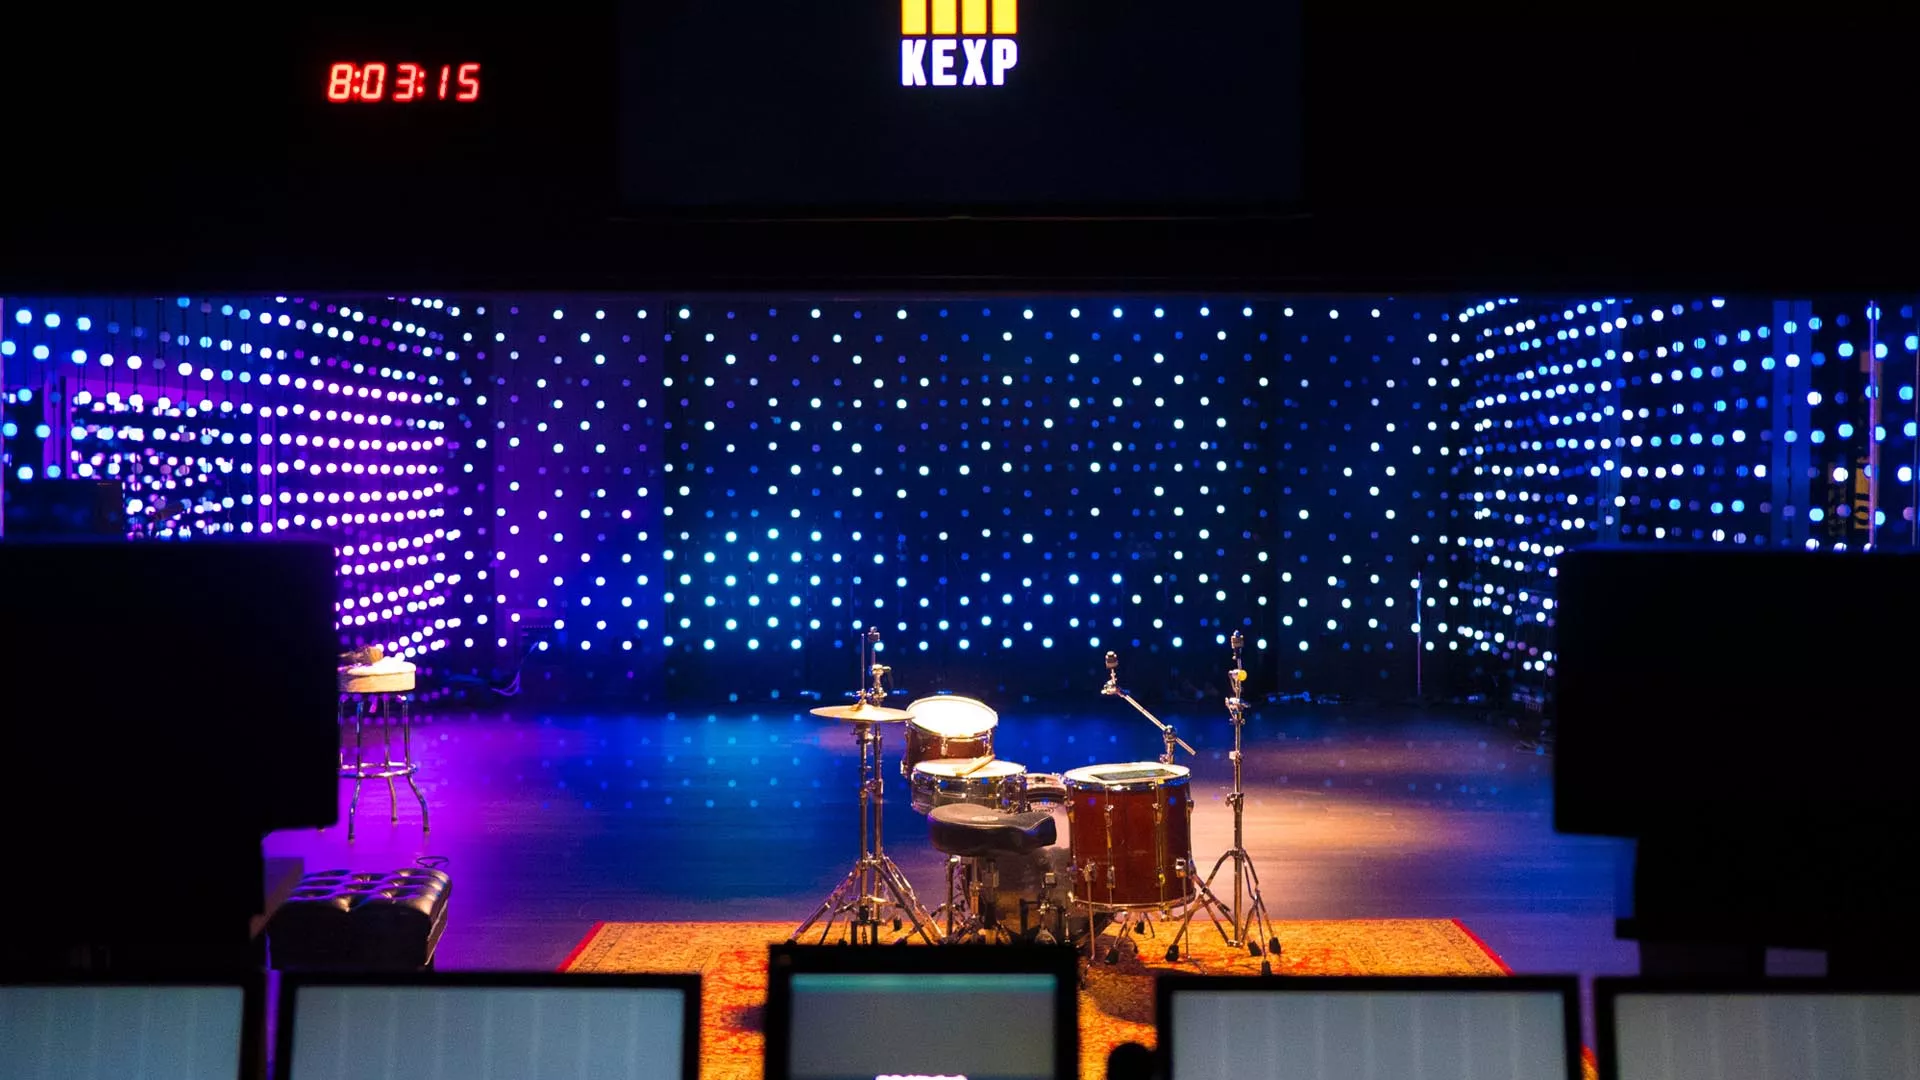 KEXP – The Live Room